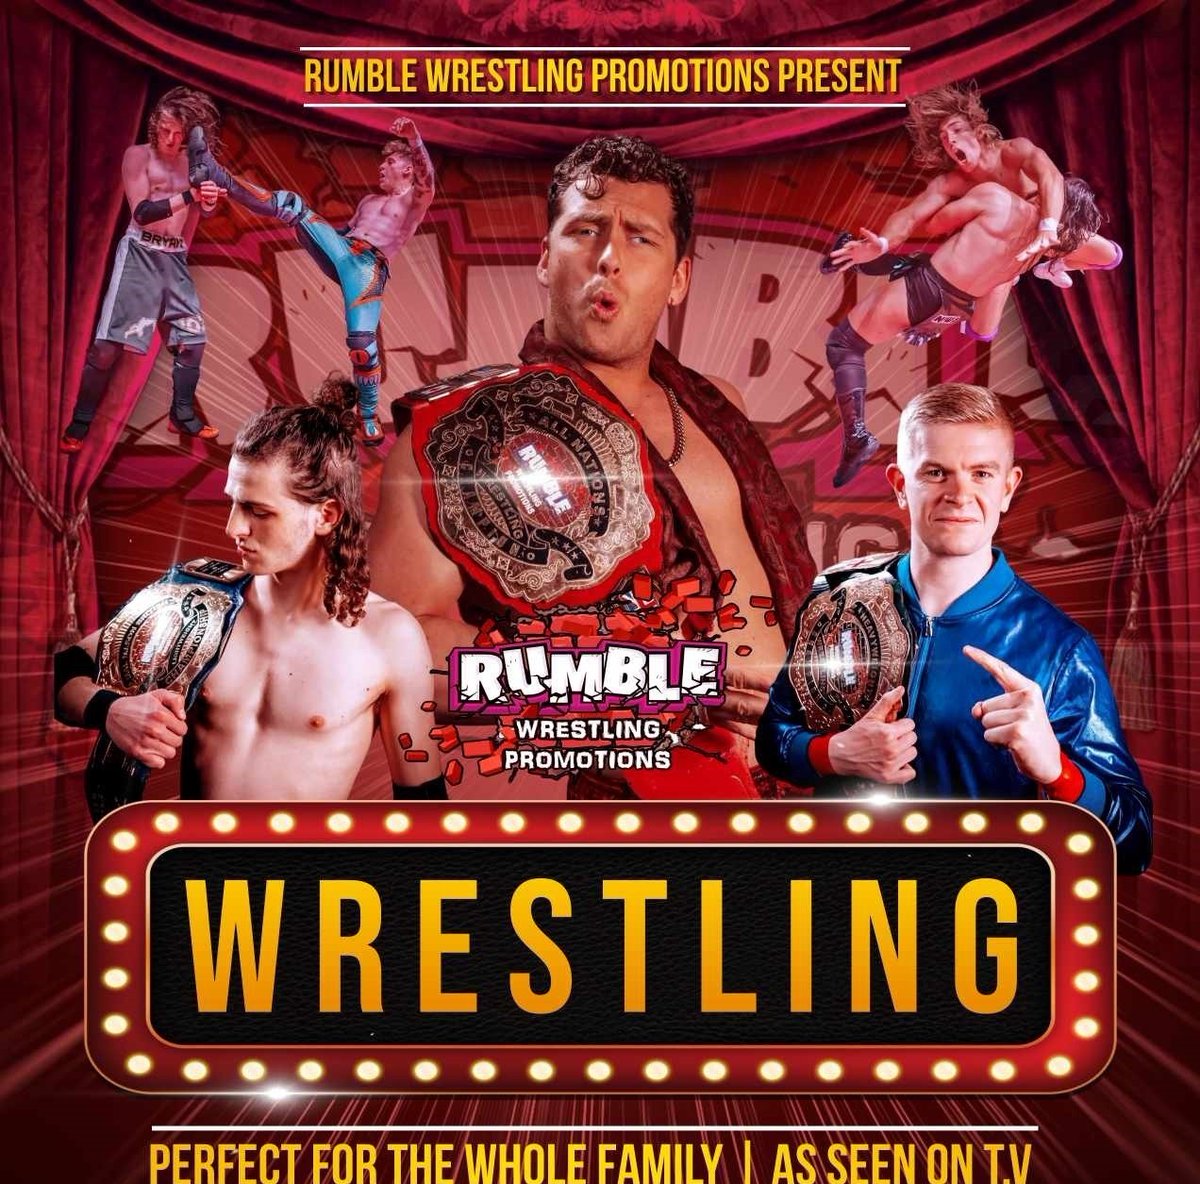 Get ready for some action-packed entertainment at Rumble Wrestling on Sunday 29 September at 3pm! 🤼‍♂️ 

Don't miss out on our early bird discount of 15% until 22 April ow.ly/SoA250Rc9zH

💪🎟️ #RumbleWrestling #WrestlingFansUnite #watersmeetrickmansworth #supportlocaltheatre